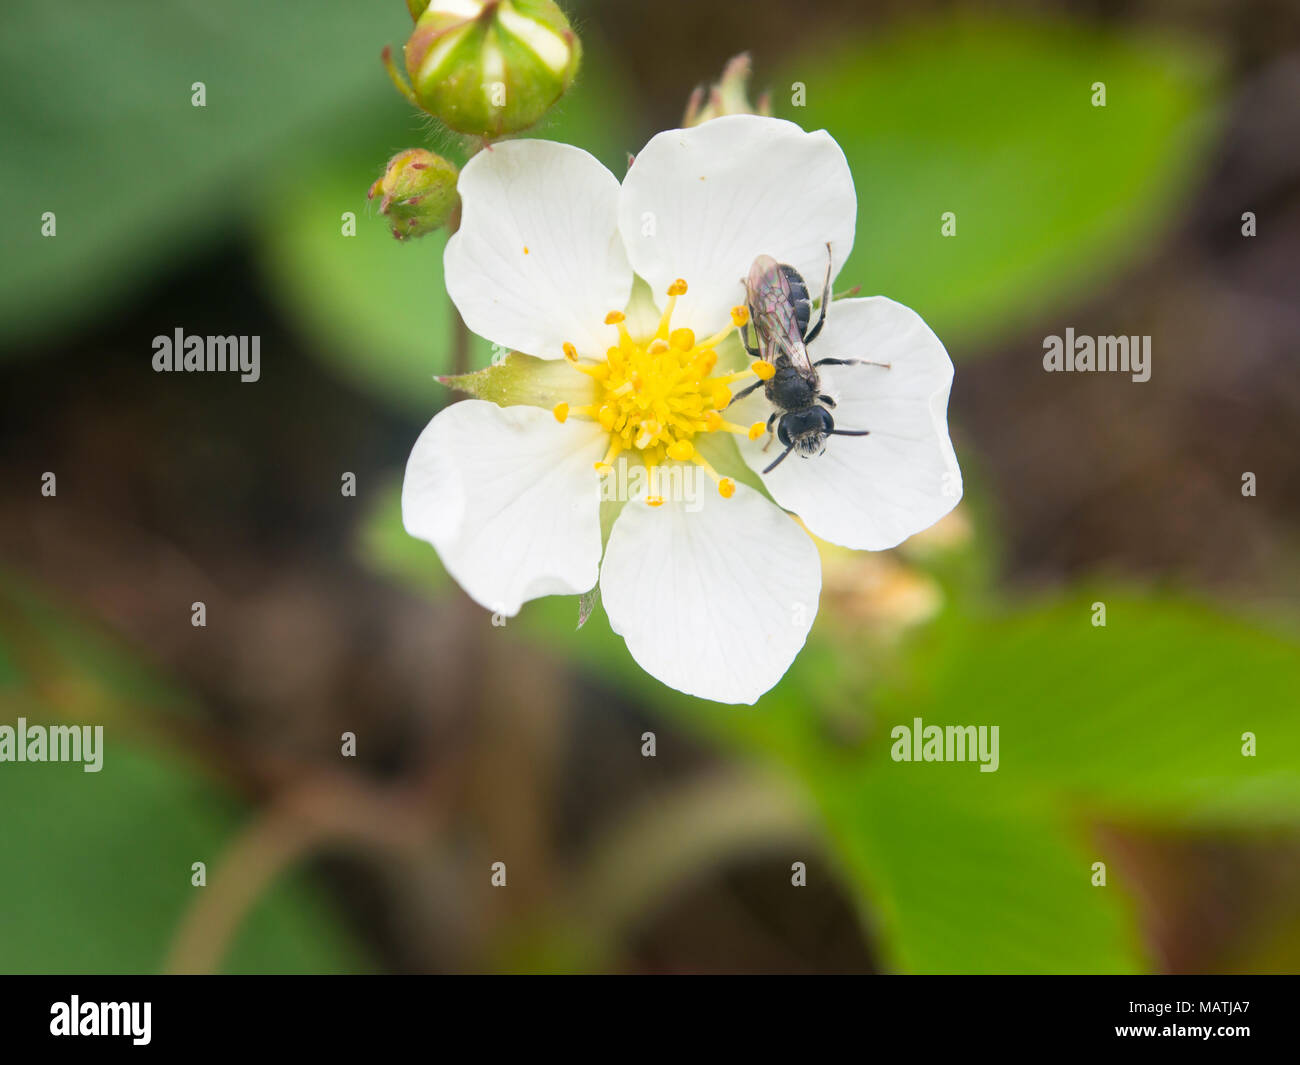 Wild european strawberry flower, Fragaria vesta, close up with a fly Stock Photo